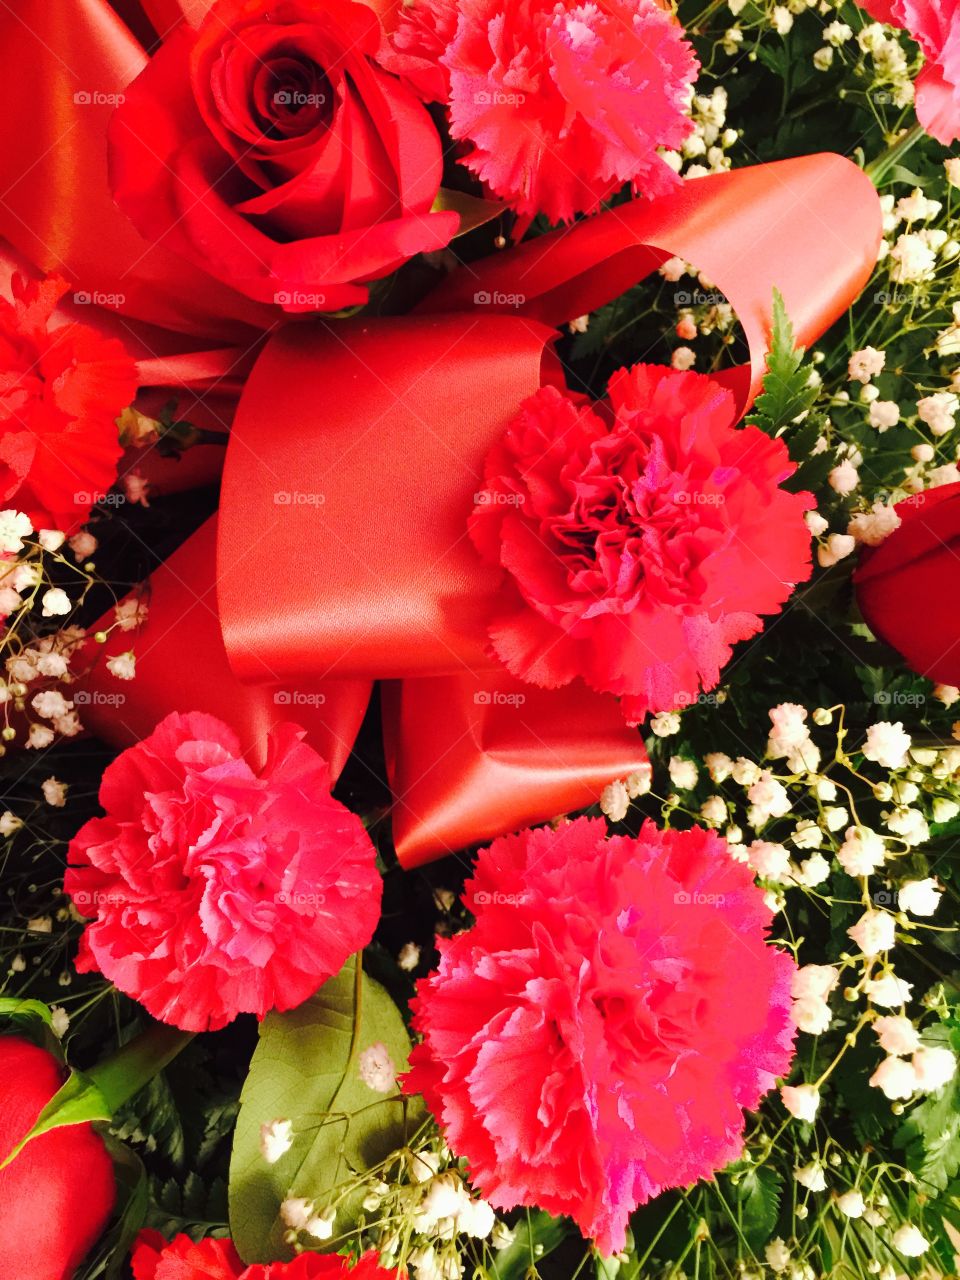 Red Floral Arrangement. Floral arrangement of red roses, red carnations and red ribbons